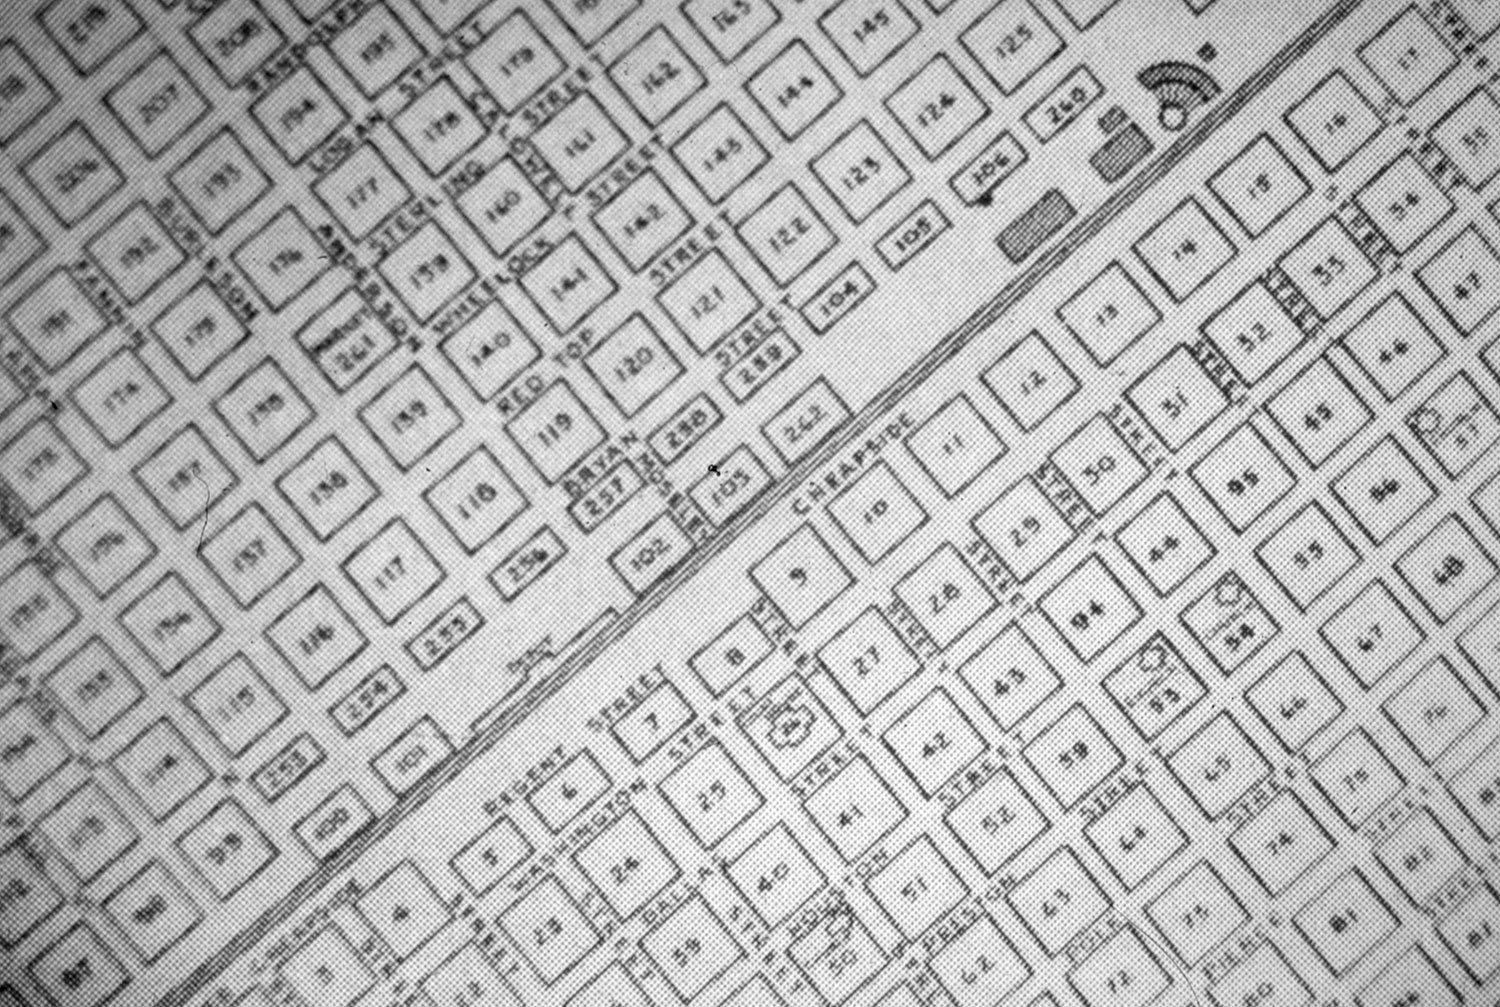 downtown bryan grid street map before the streets were numbered.